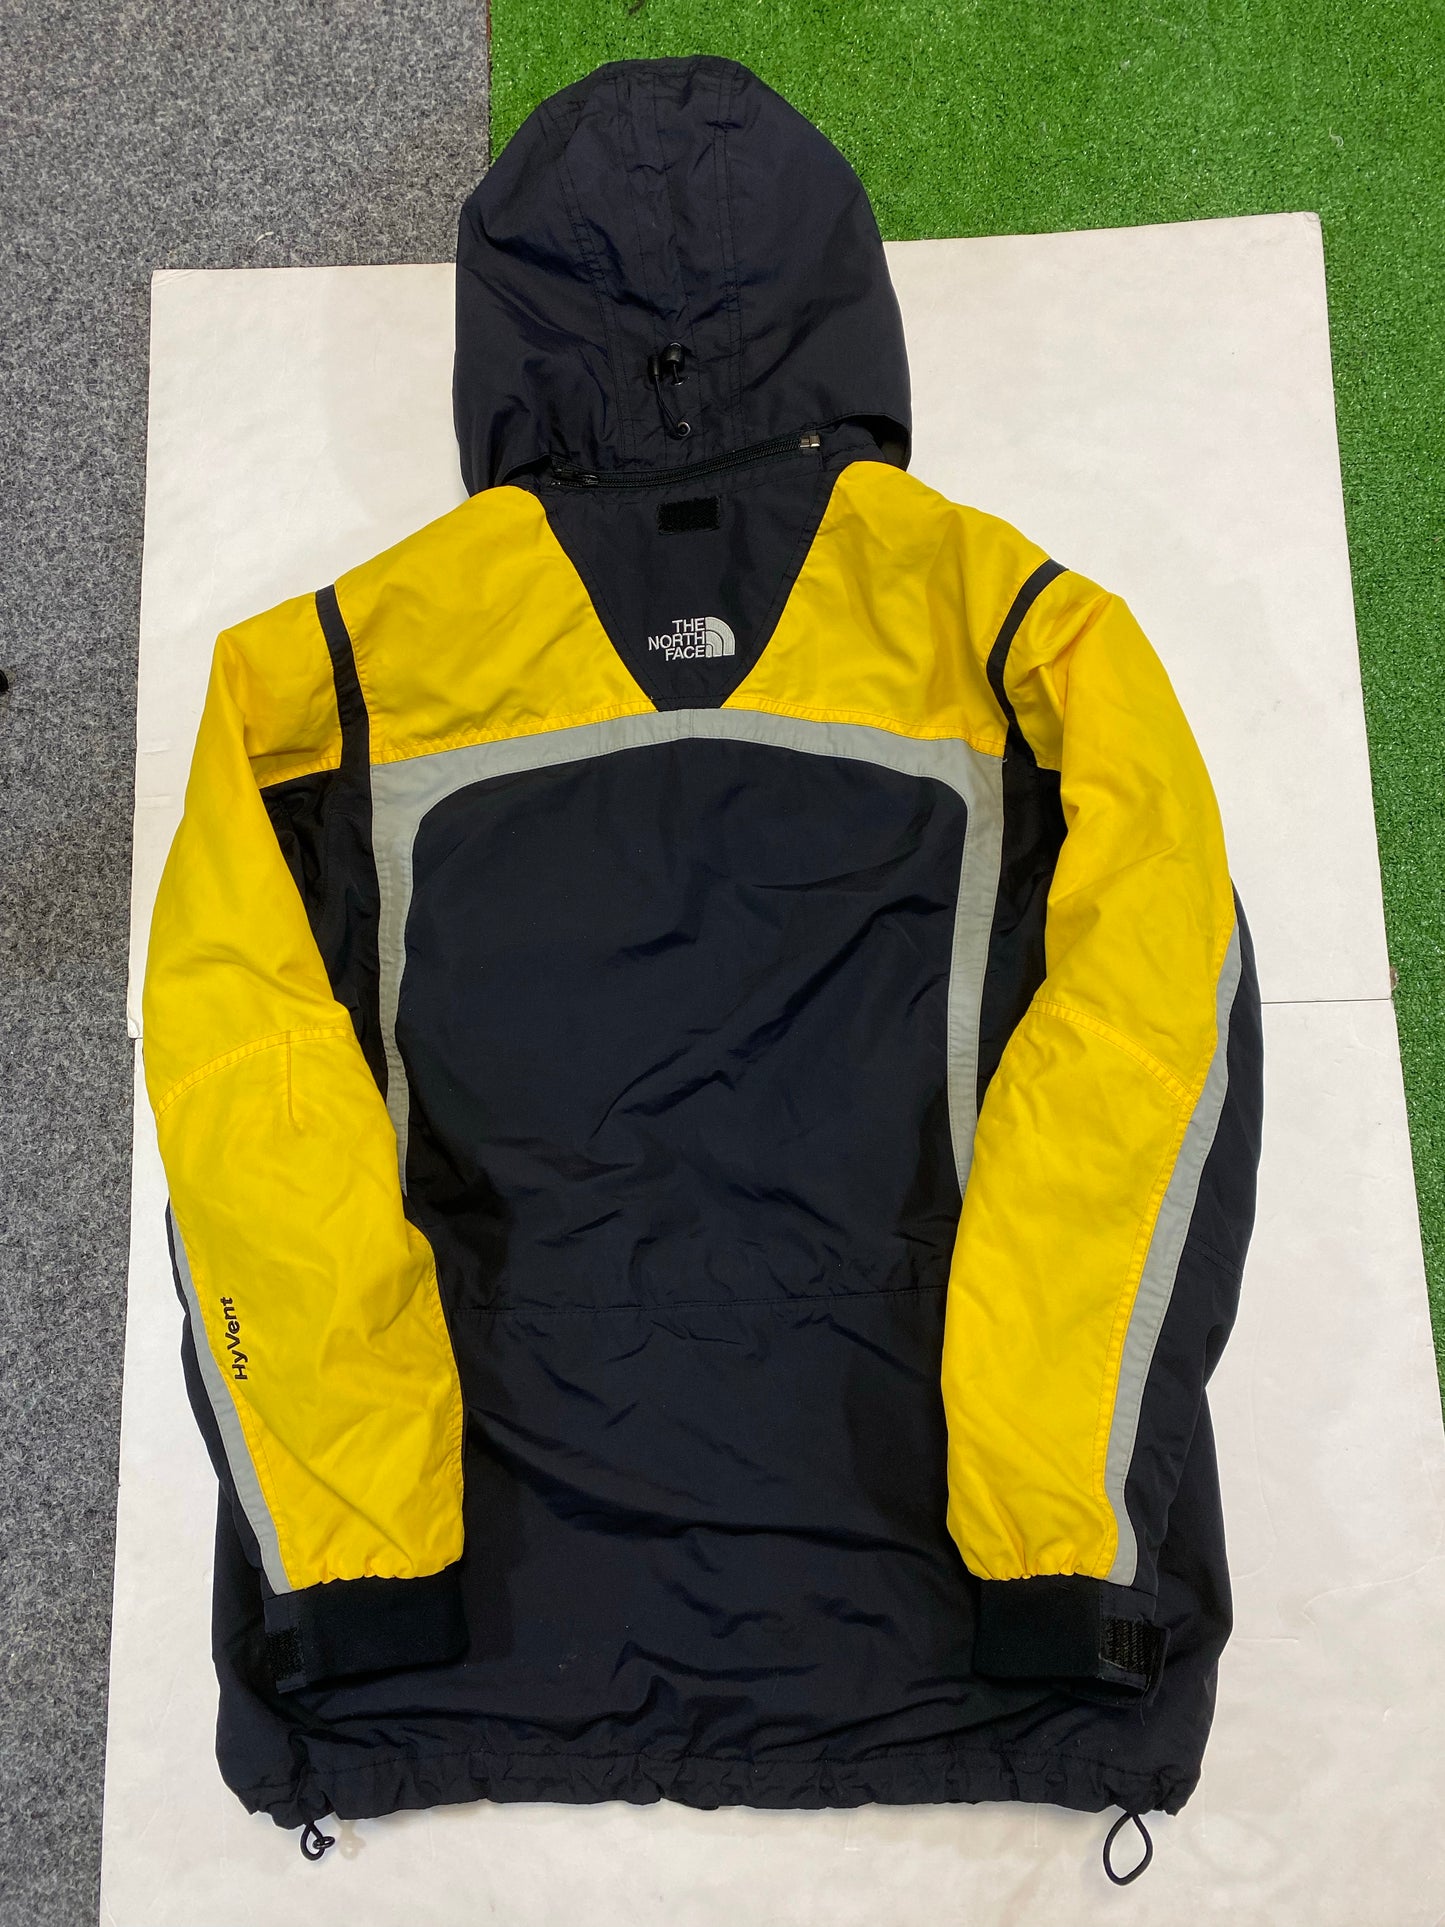 1990’s The North Face Hyvent Ski Jacket